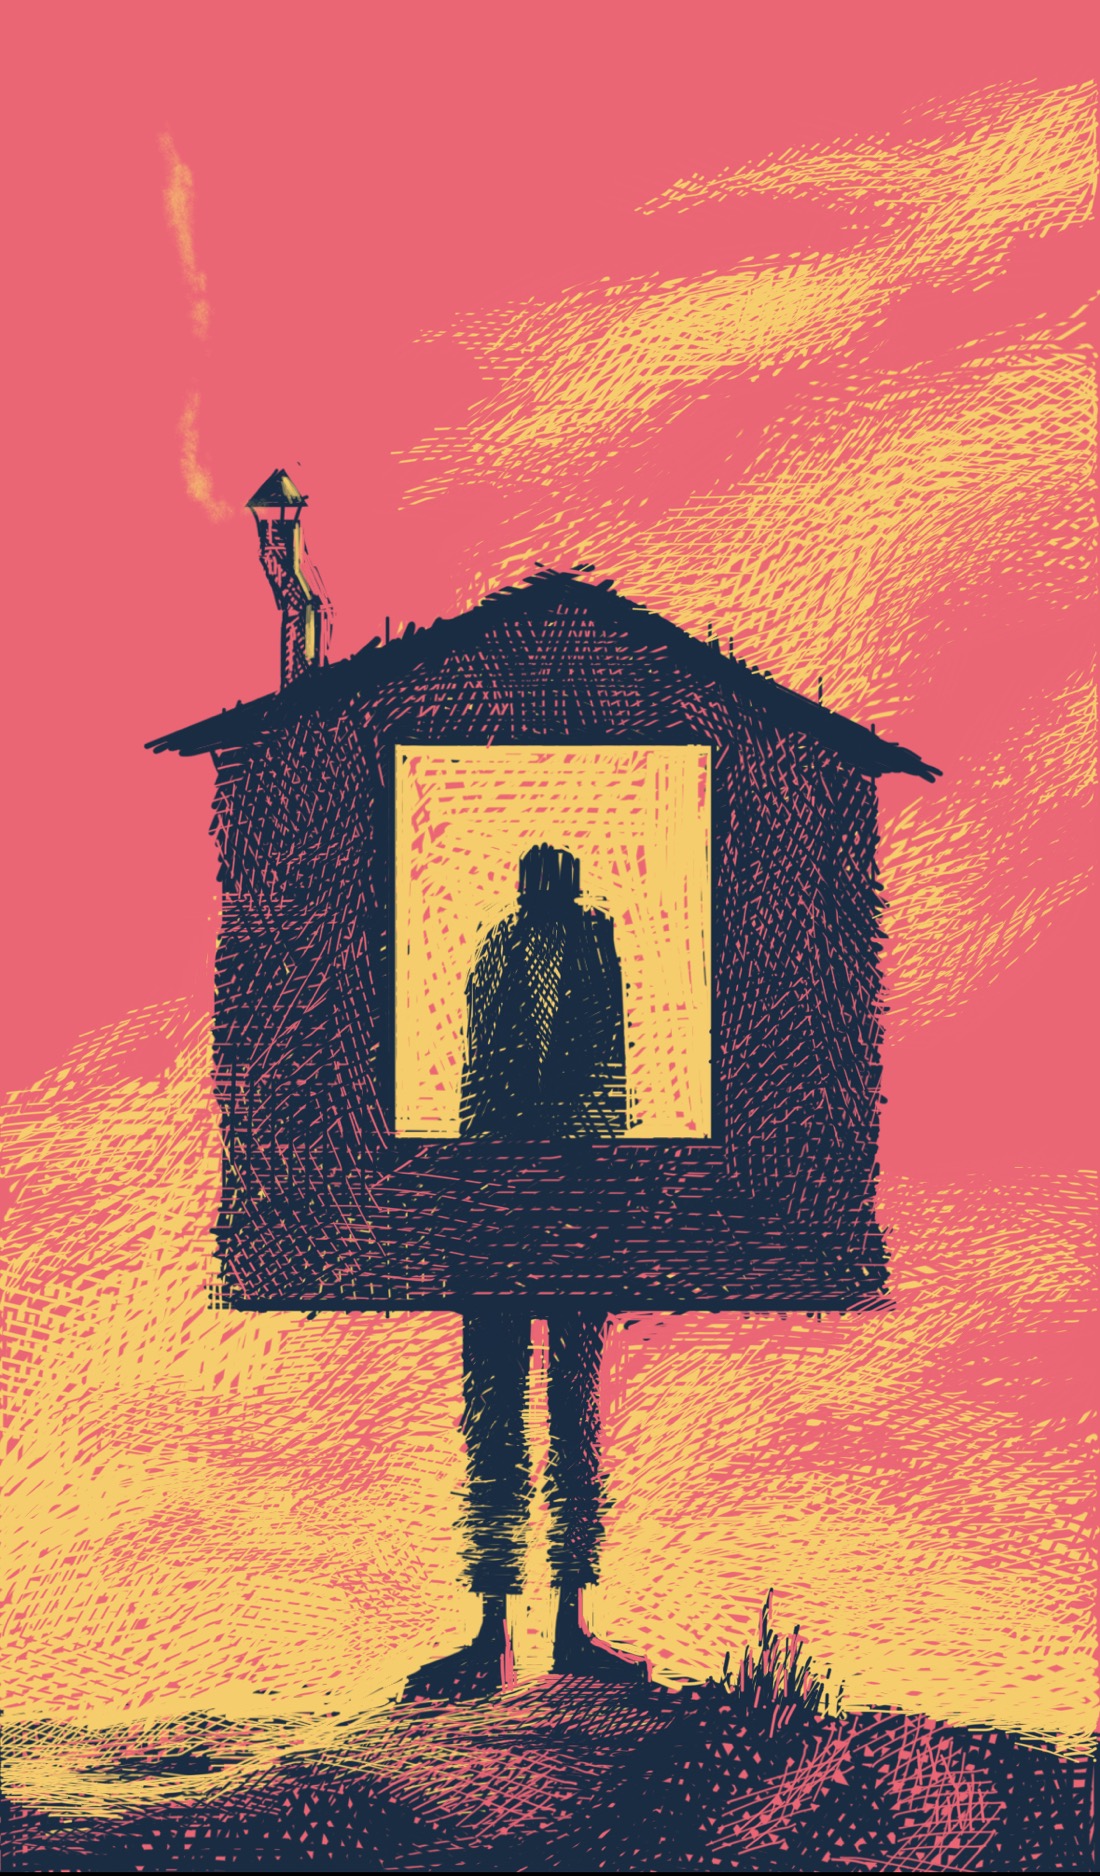 A scene in dawn light, with light yellow clouds on a pink sky. A person looks out of the windows of a small cabin with long spindly legs; the effect suggests that maybe it's the person who has long spindly legs, wearing the cabin as though it's a coat or sandwich board.